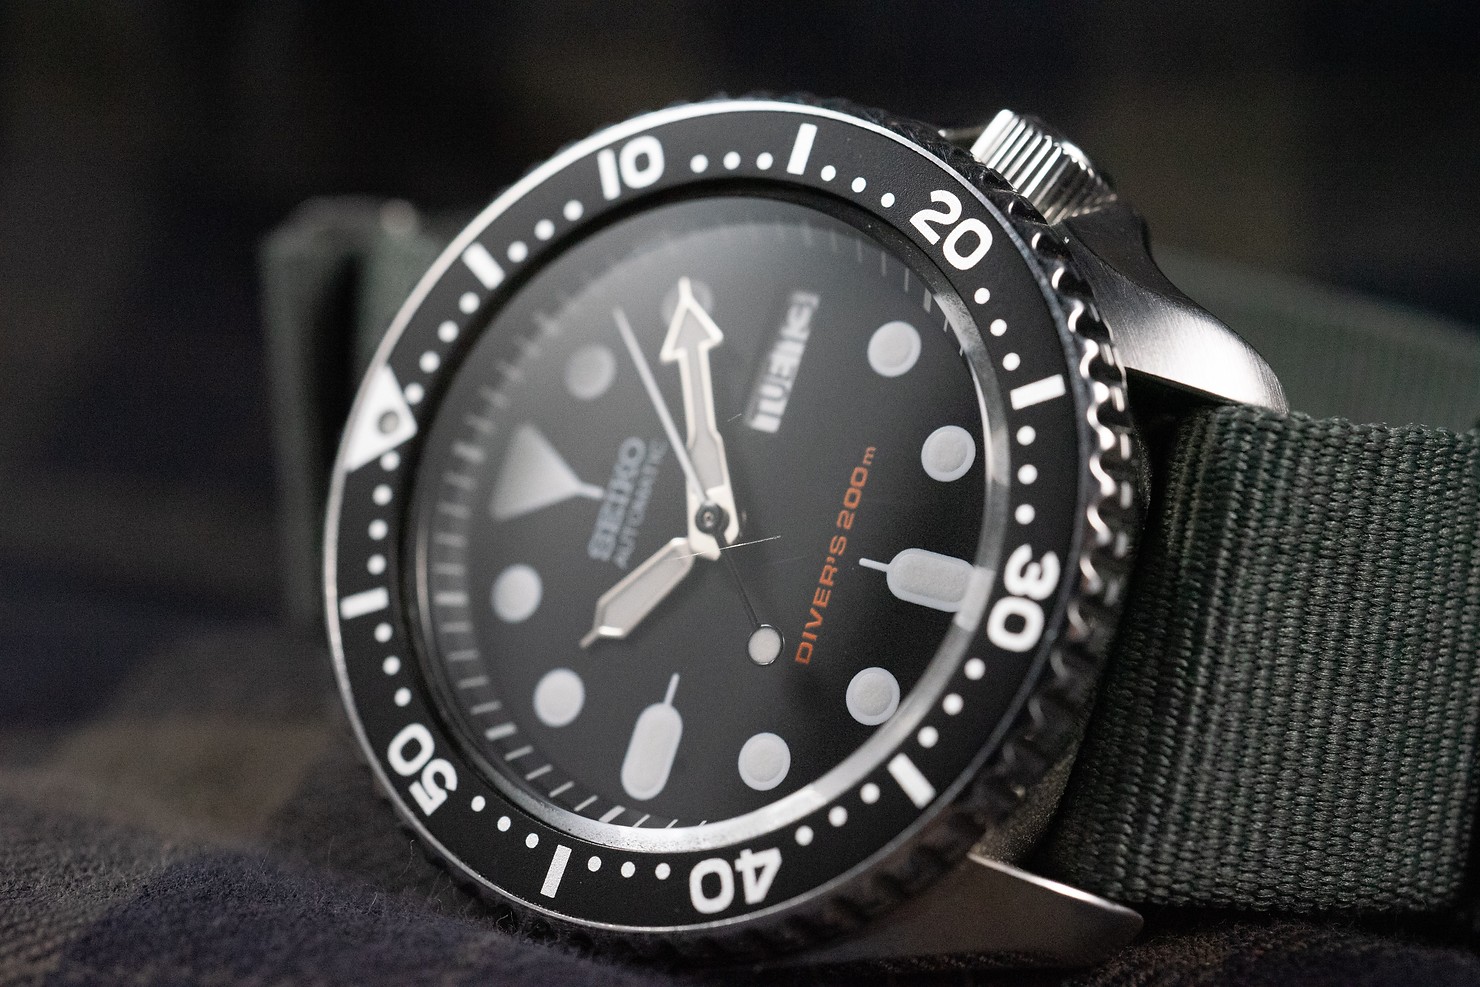 Second Look The Seiko SKX007 200m Dive Watch - BEYOND THE DIAL